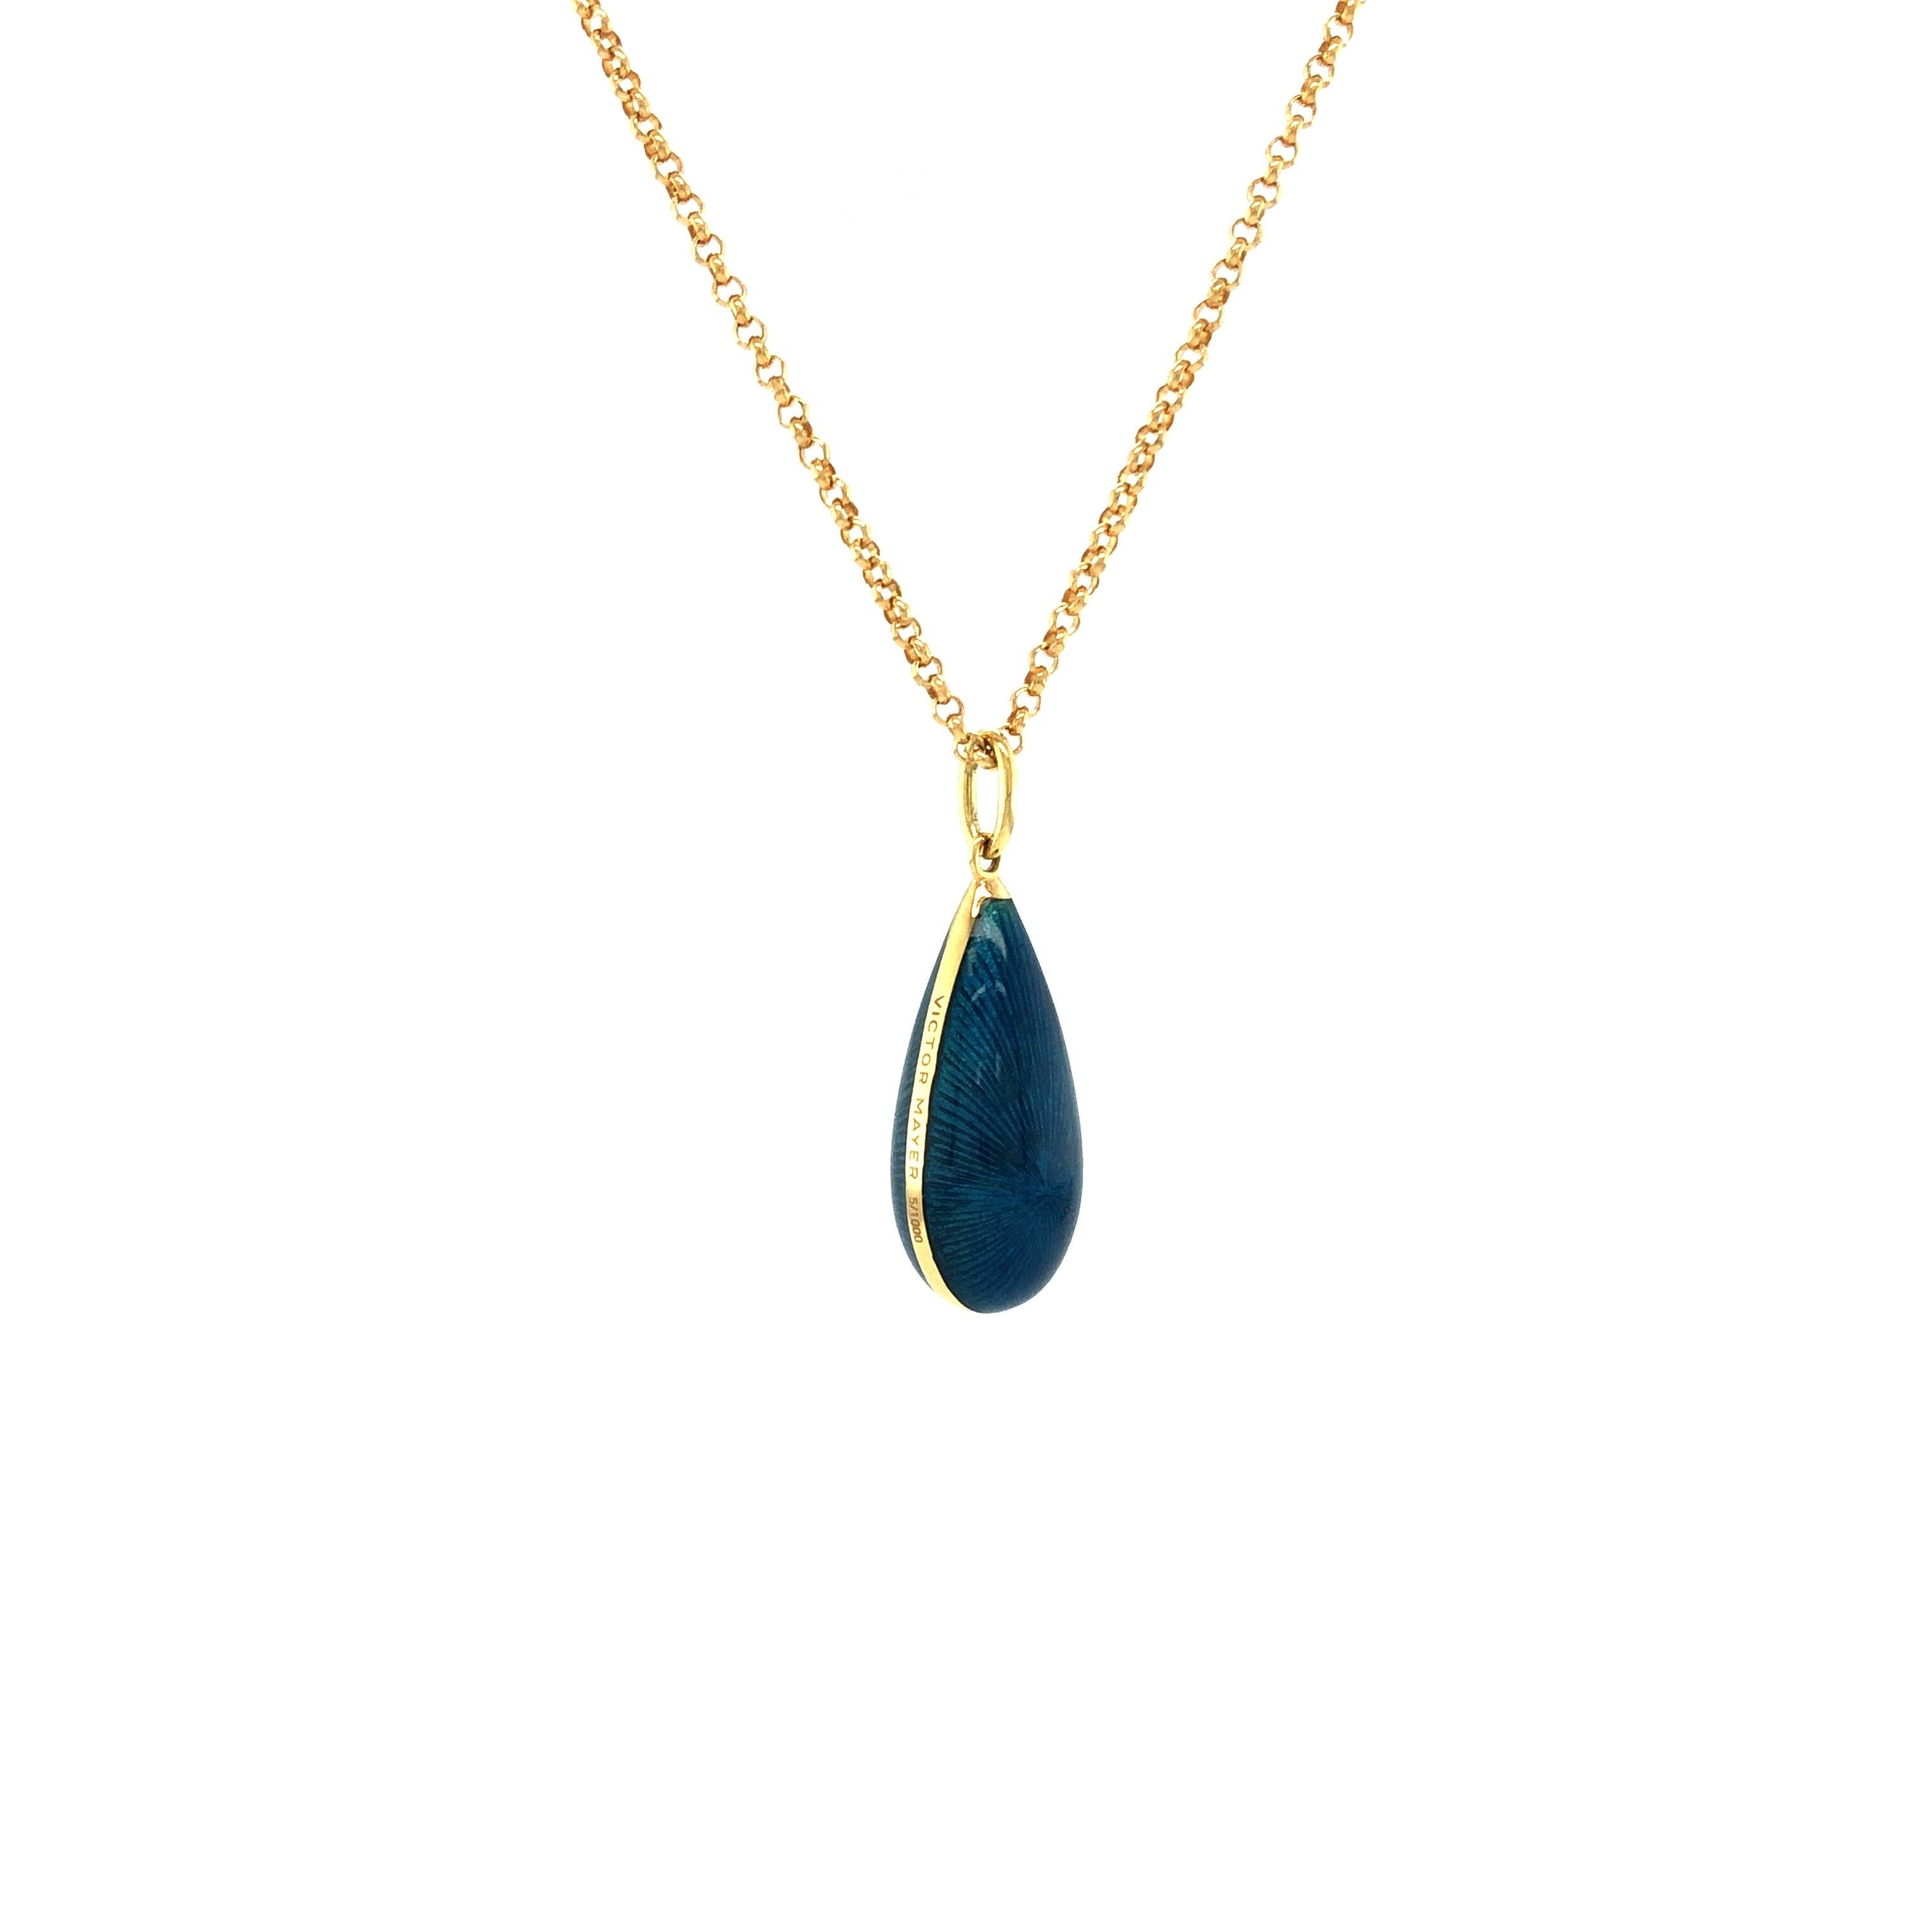 Victor Mayer drop pendant, 18k yellow gold, petrol blue vitreous enamel, Dew Drop collection, measurements app. 7.6 mm x 22 mm

About the creator Victor Mayer
Victor Mayer is internationally renowned for elegant timeless designs and unrivalled